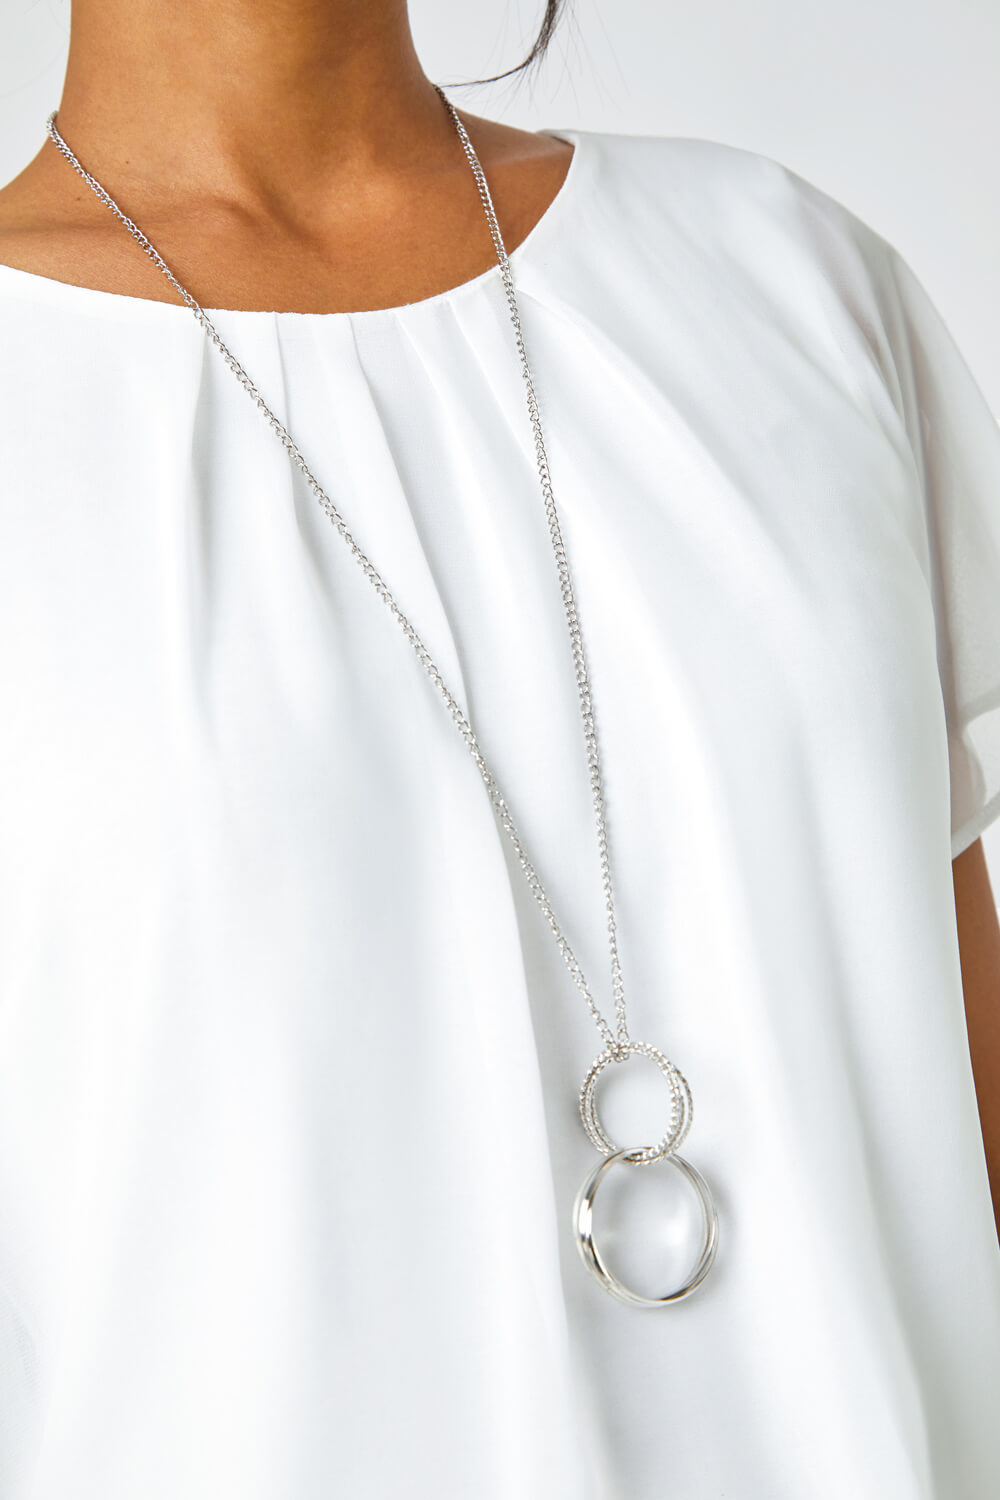 Ivory  Chiffon Jersey Blouson Top with Necklace, Image 5 of 5